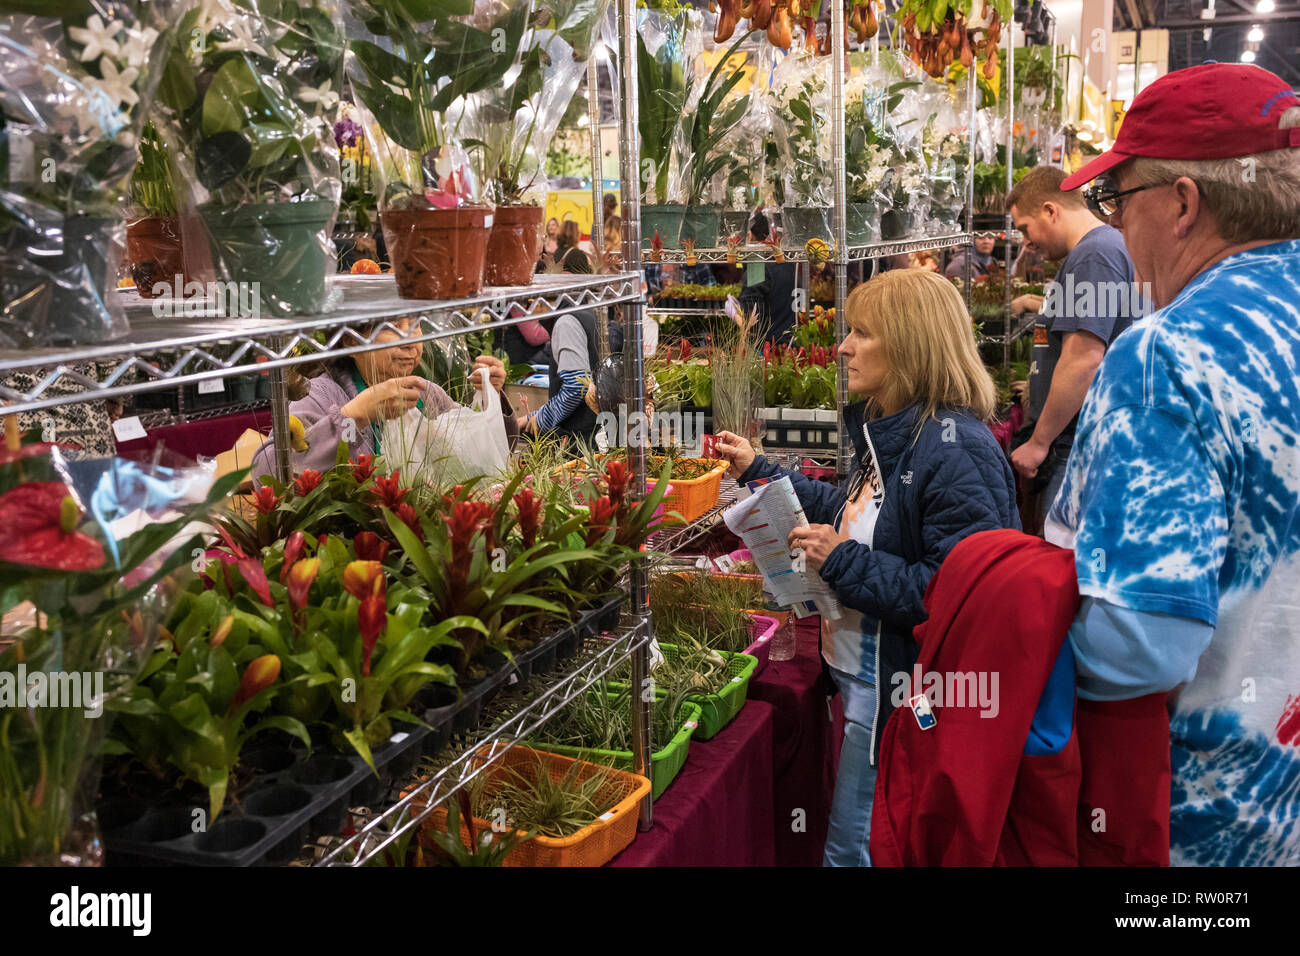 The 2019 PHS Philadelphia Flower Show, “Flower Power,” paying tribute to the enormous impact of flowers on our lives, March 2, 2019. Stock Photo